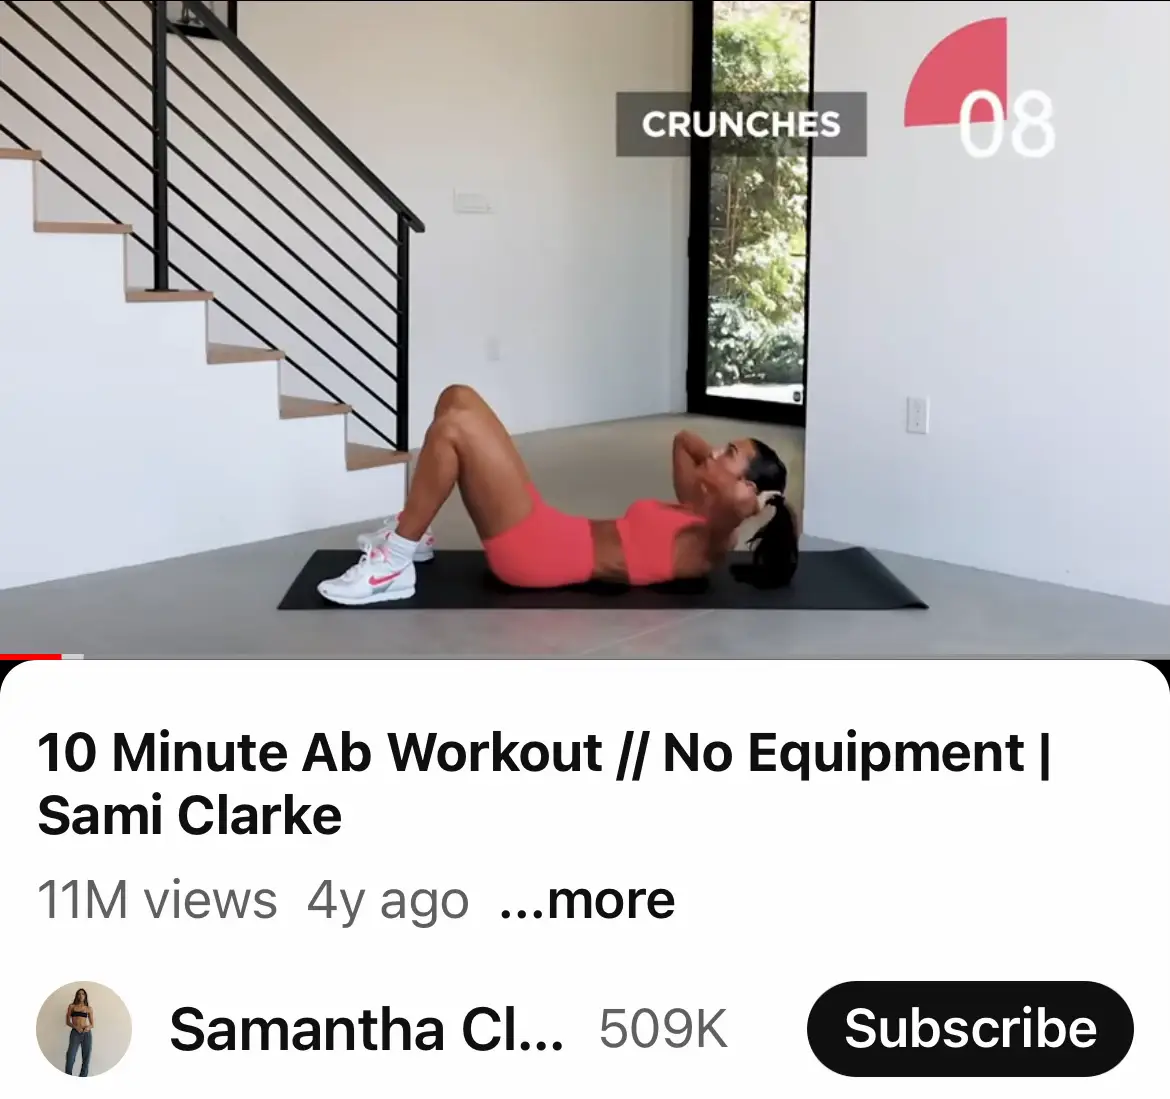 7 Chair Exercises For Abs Of Steel: Beginner Workouts - BetterMe